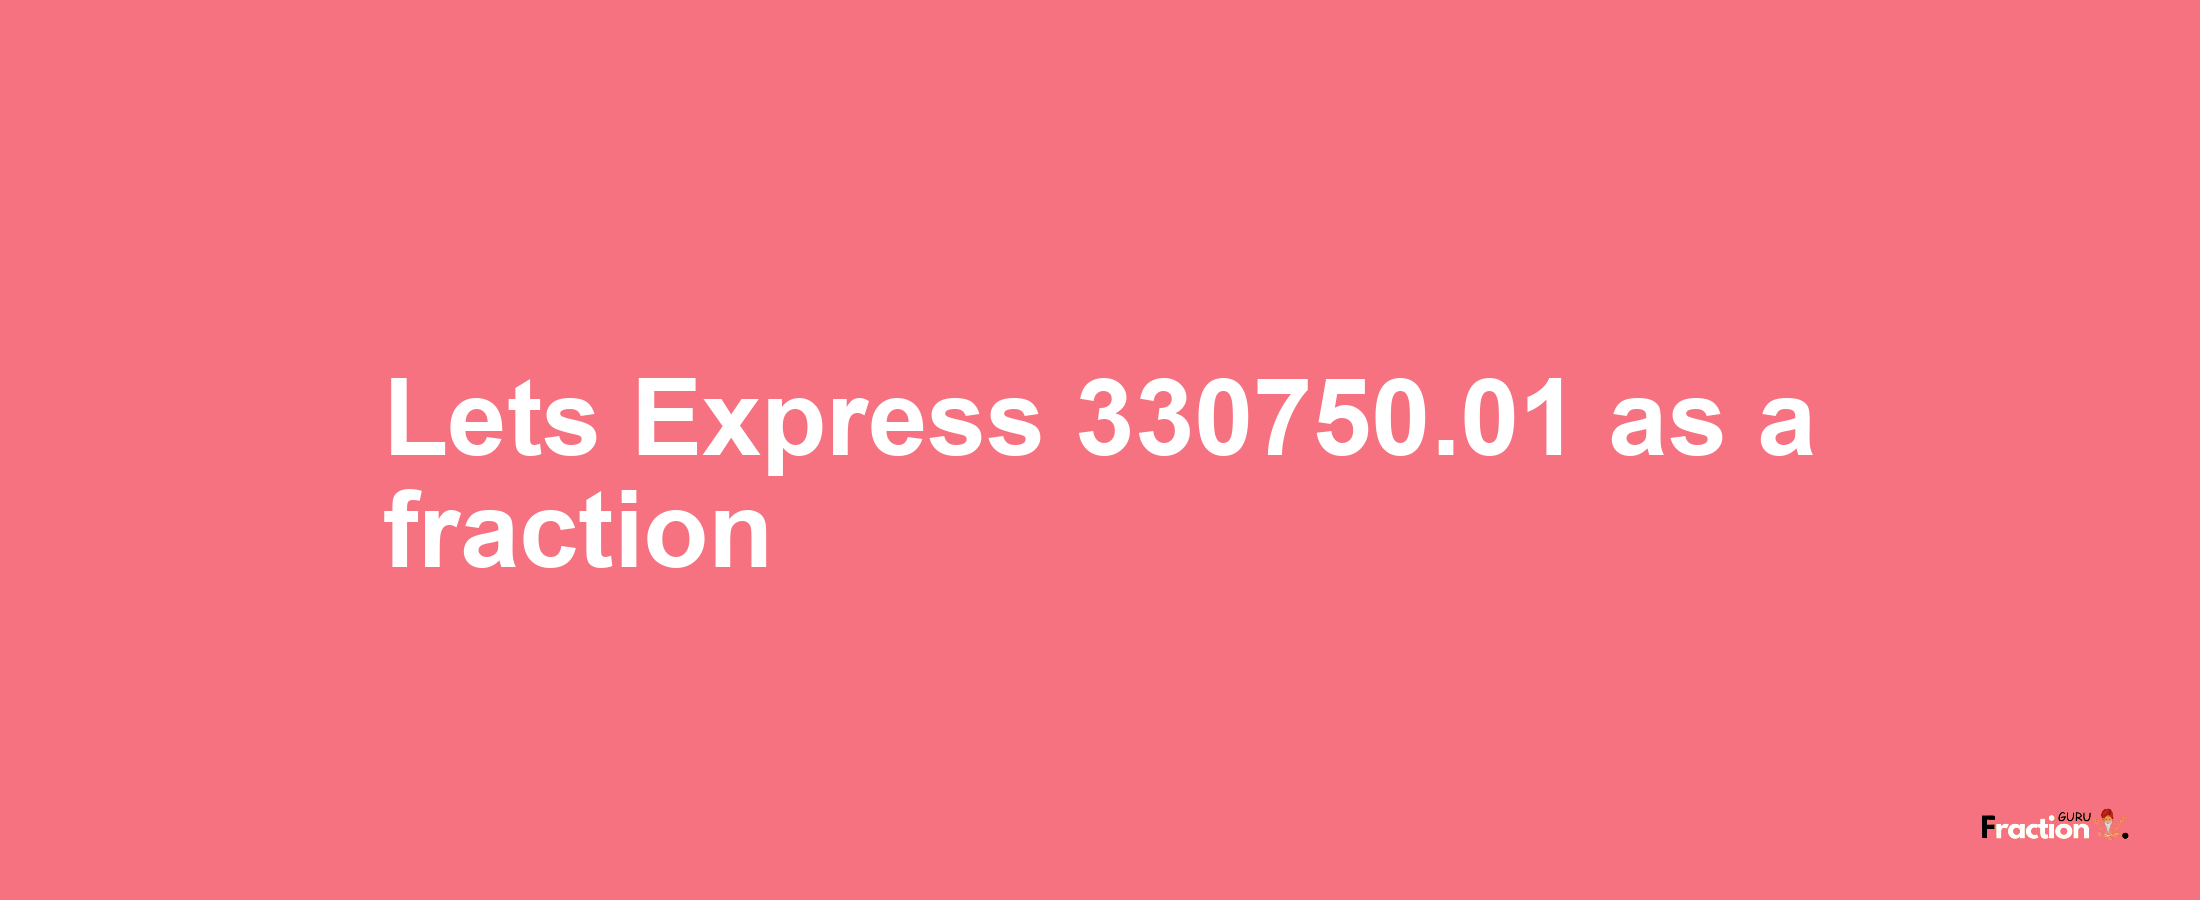 Lets Express 330750.01 as afraction